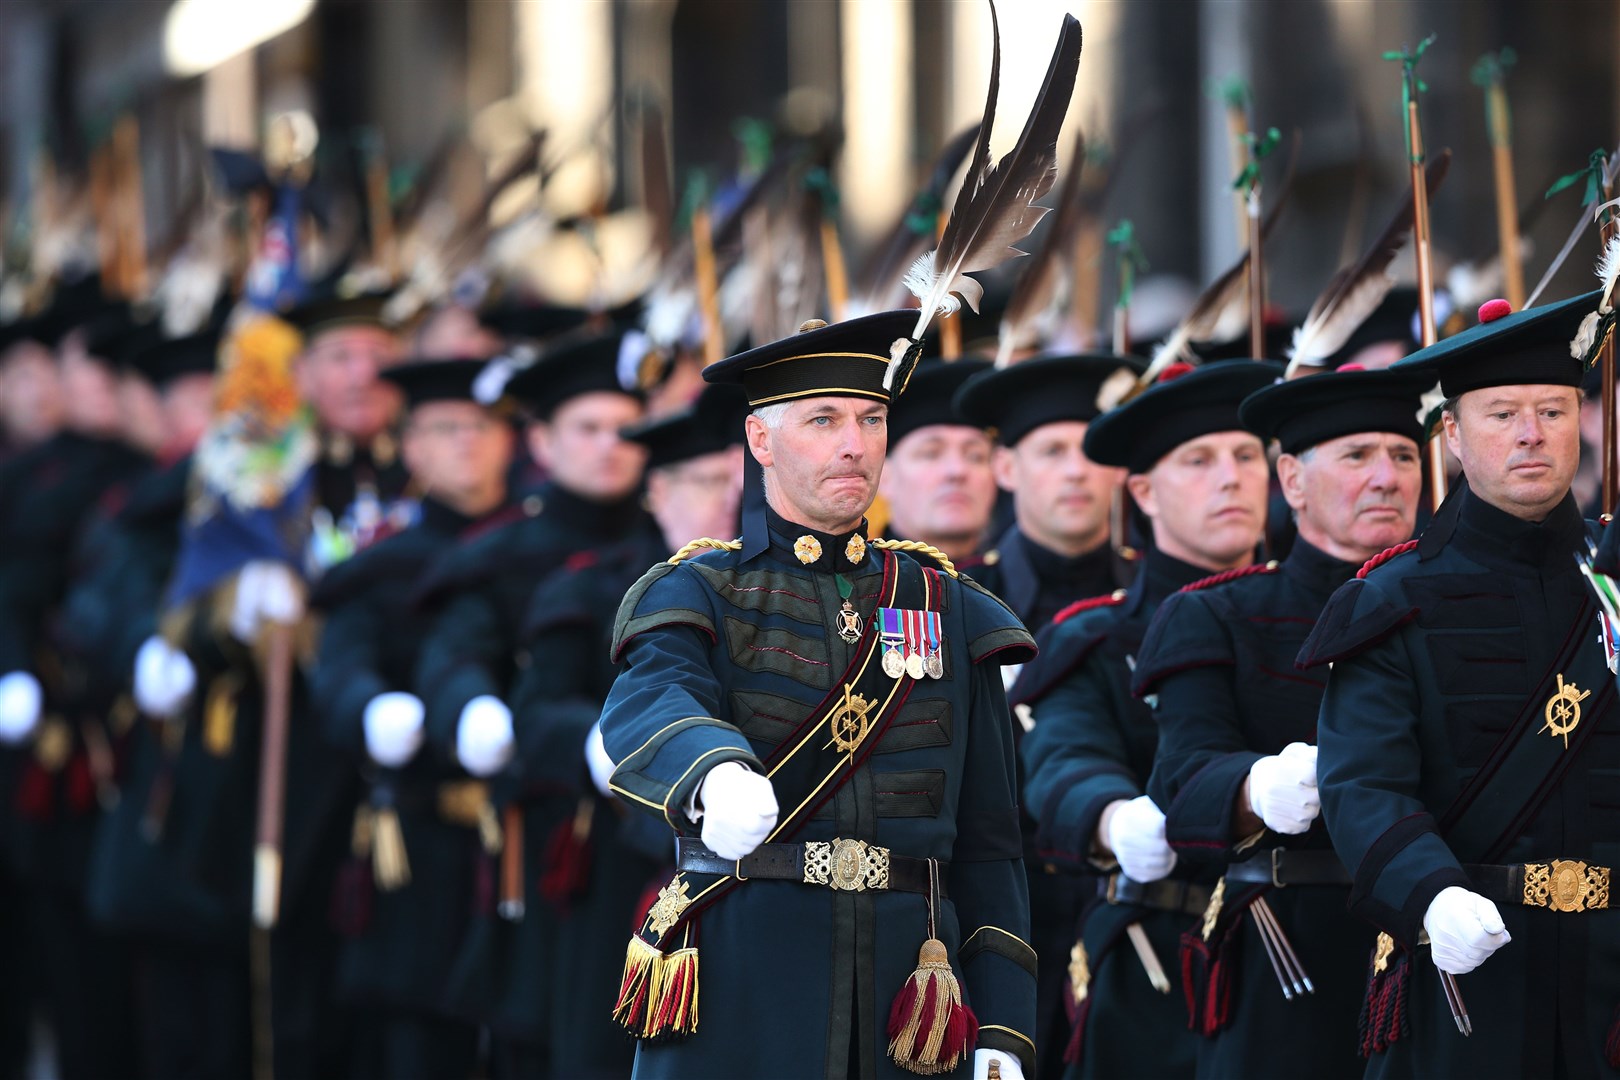 Members of the Royal Company of Archers on parade before the hearse carrying the coffin of Queen Elizabeth II departs St Giles’ Cathedral (Robert Perry/PA)